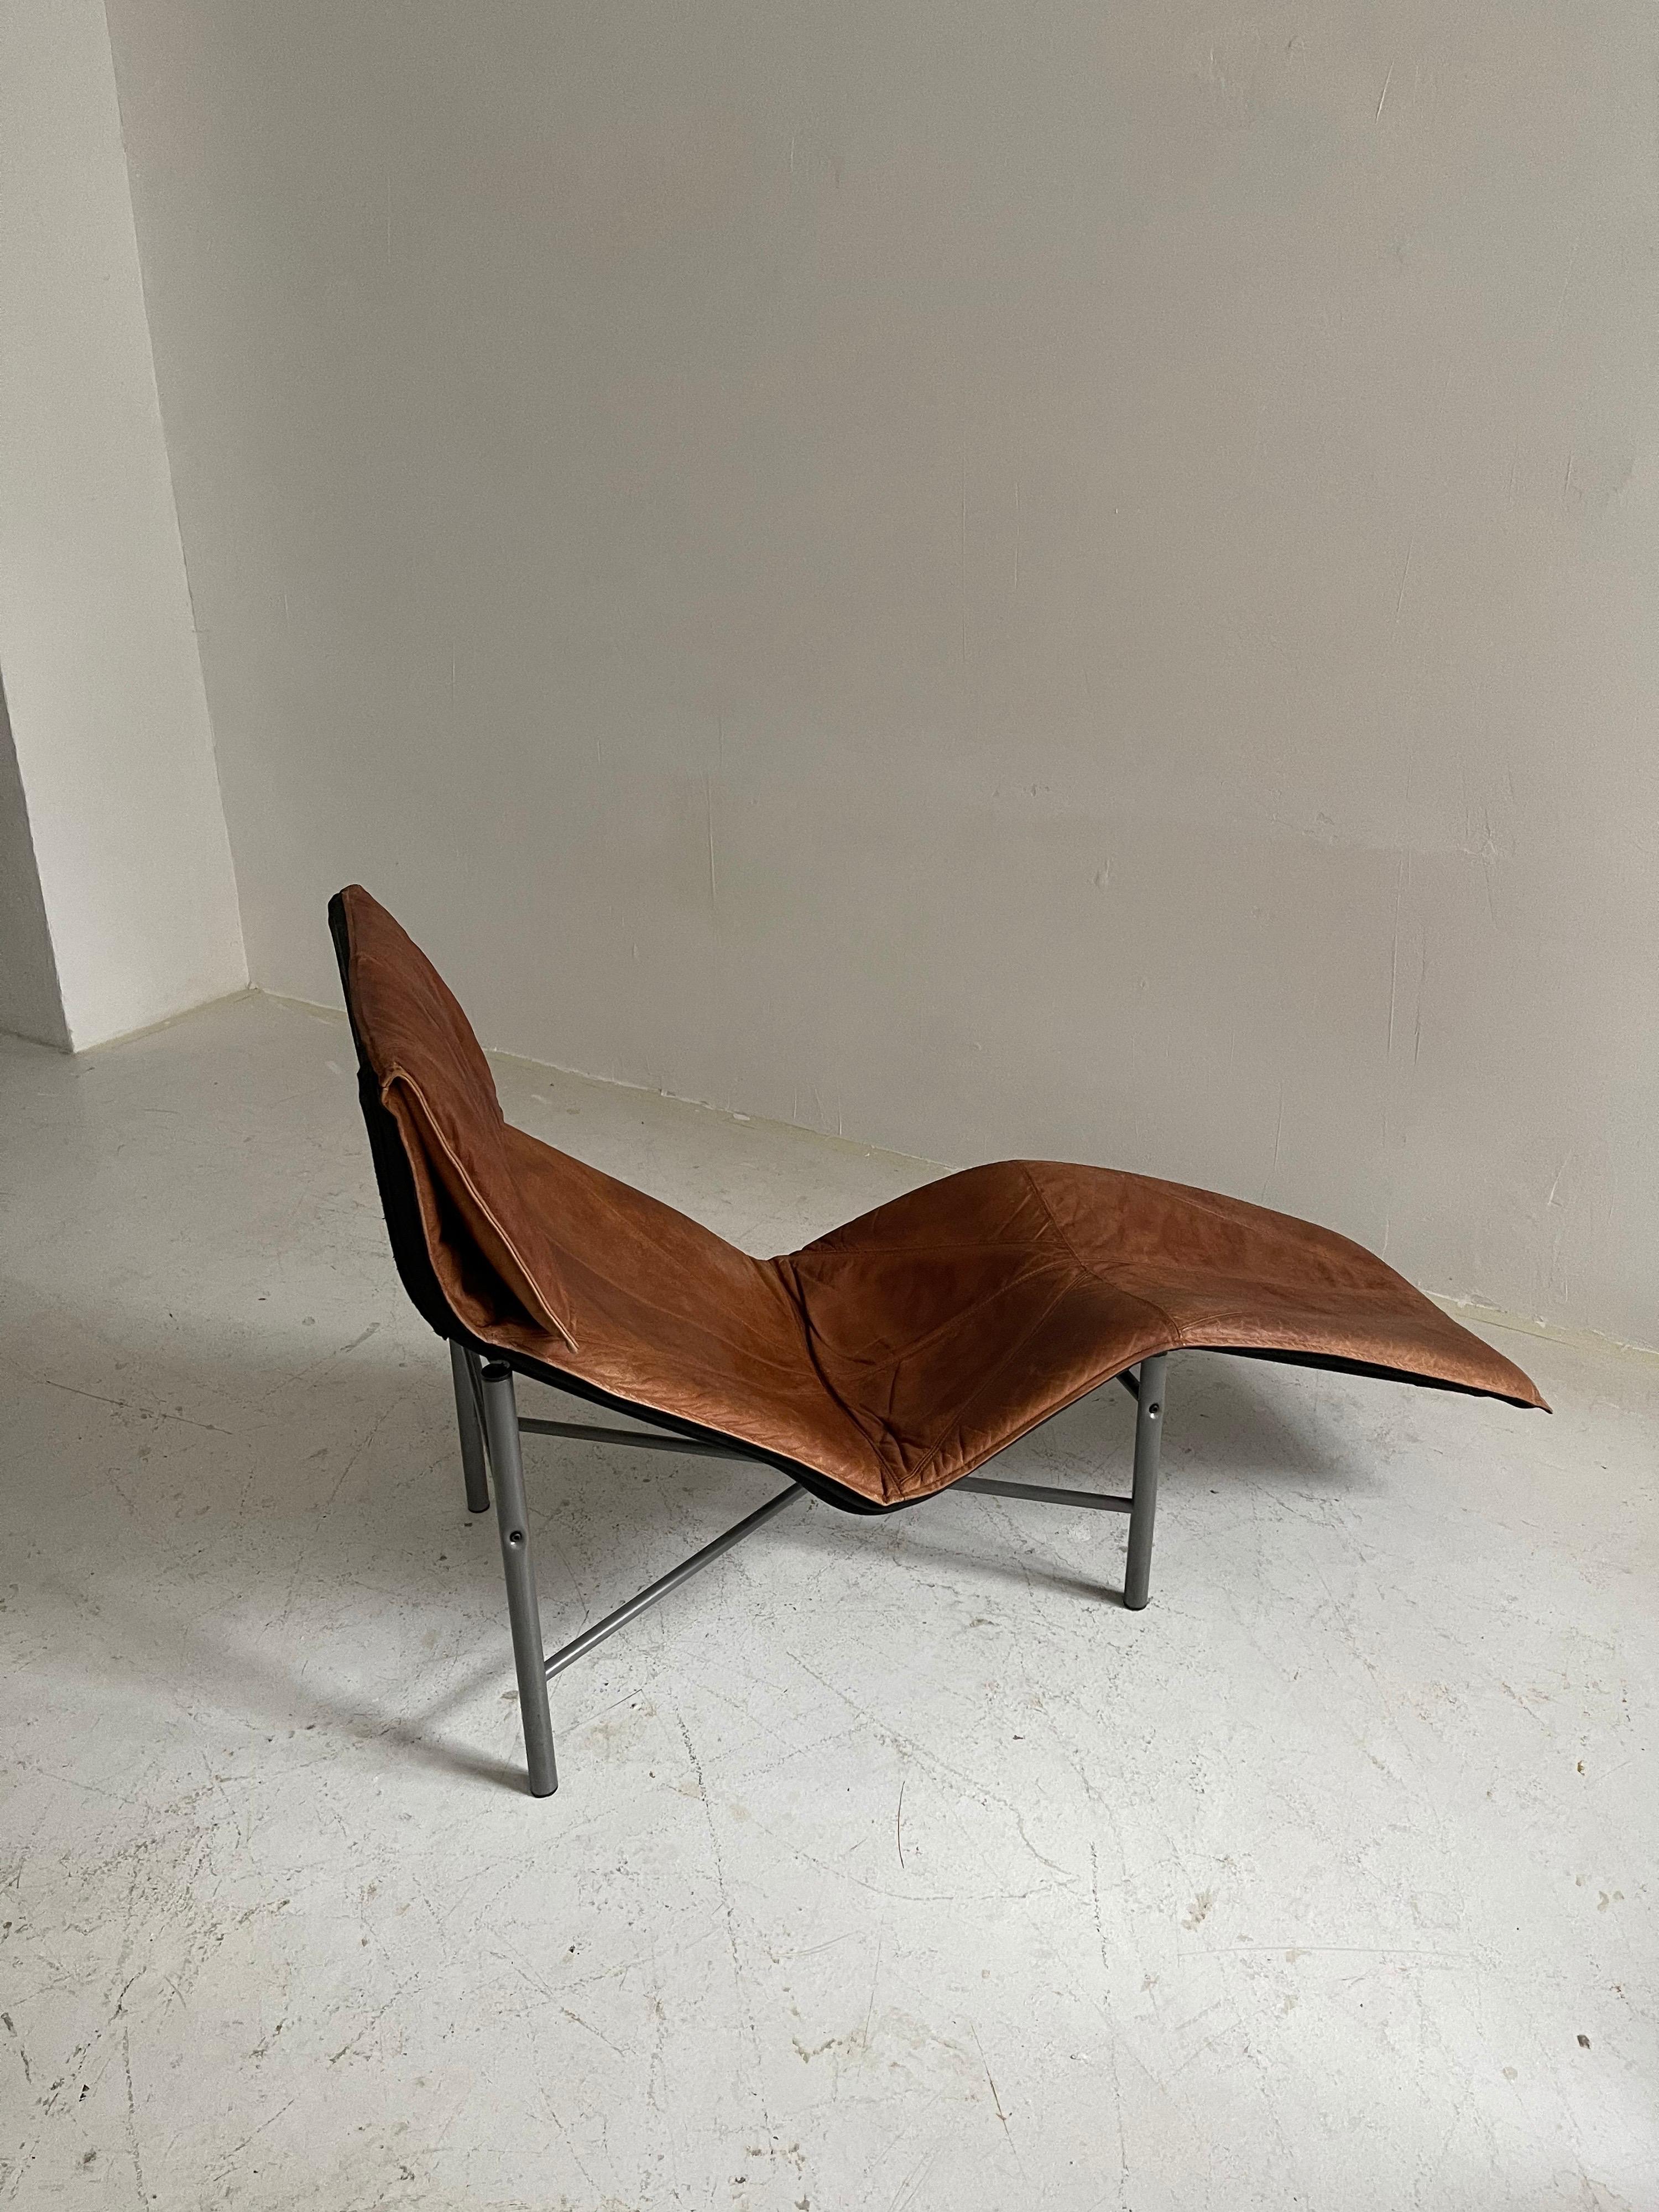 Patinated Cognac Leather Chaise Longue by Tord Bjorklund, Sweden, 1970 For Sale 1